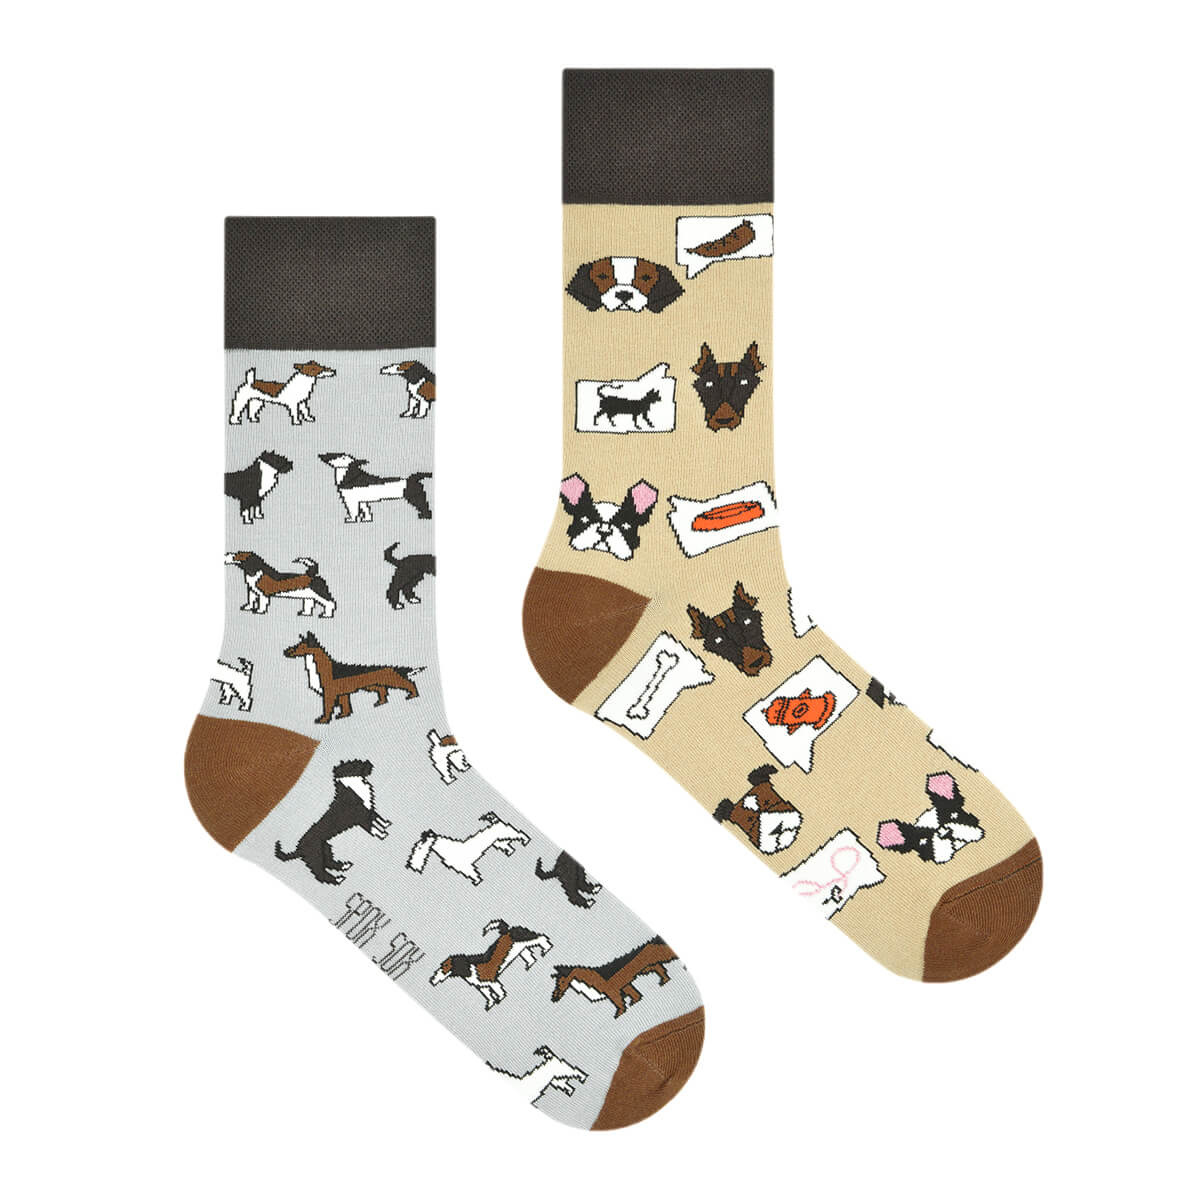 Dogs by Spox Sox